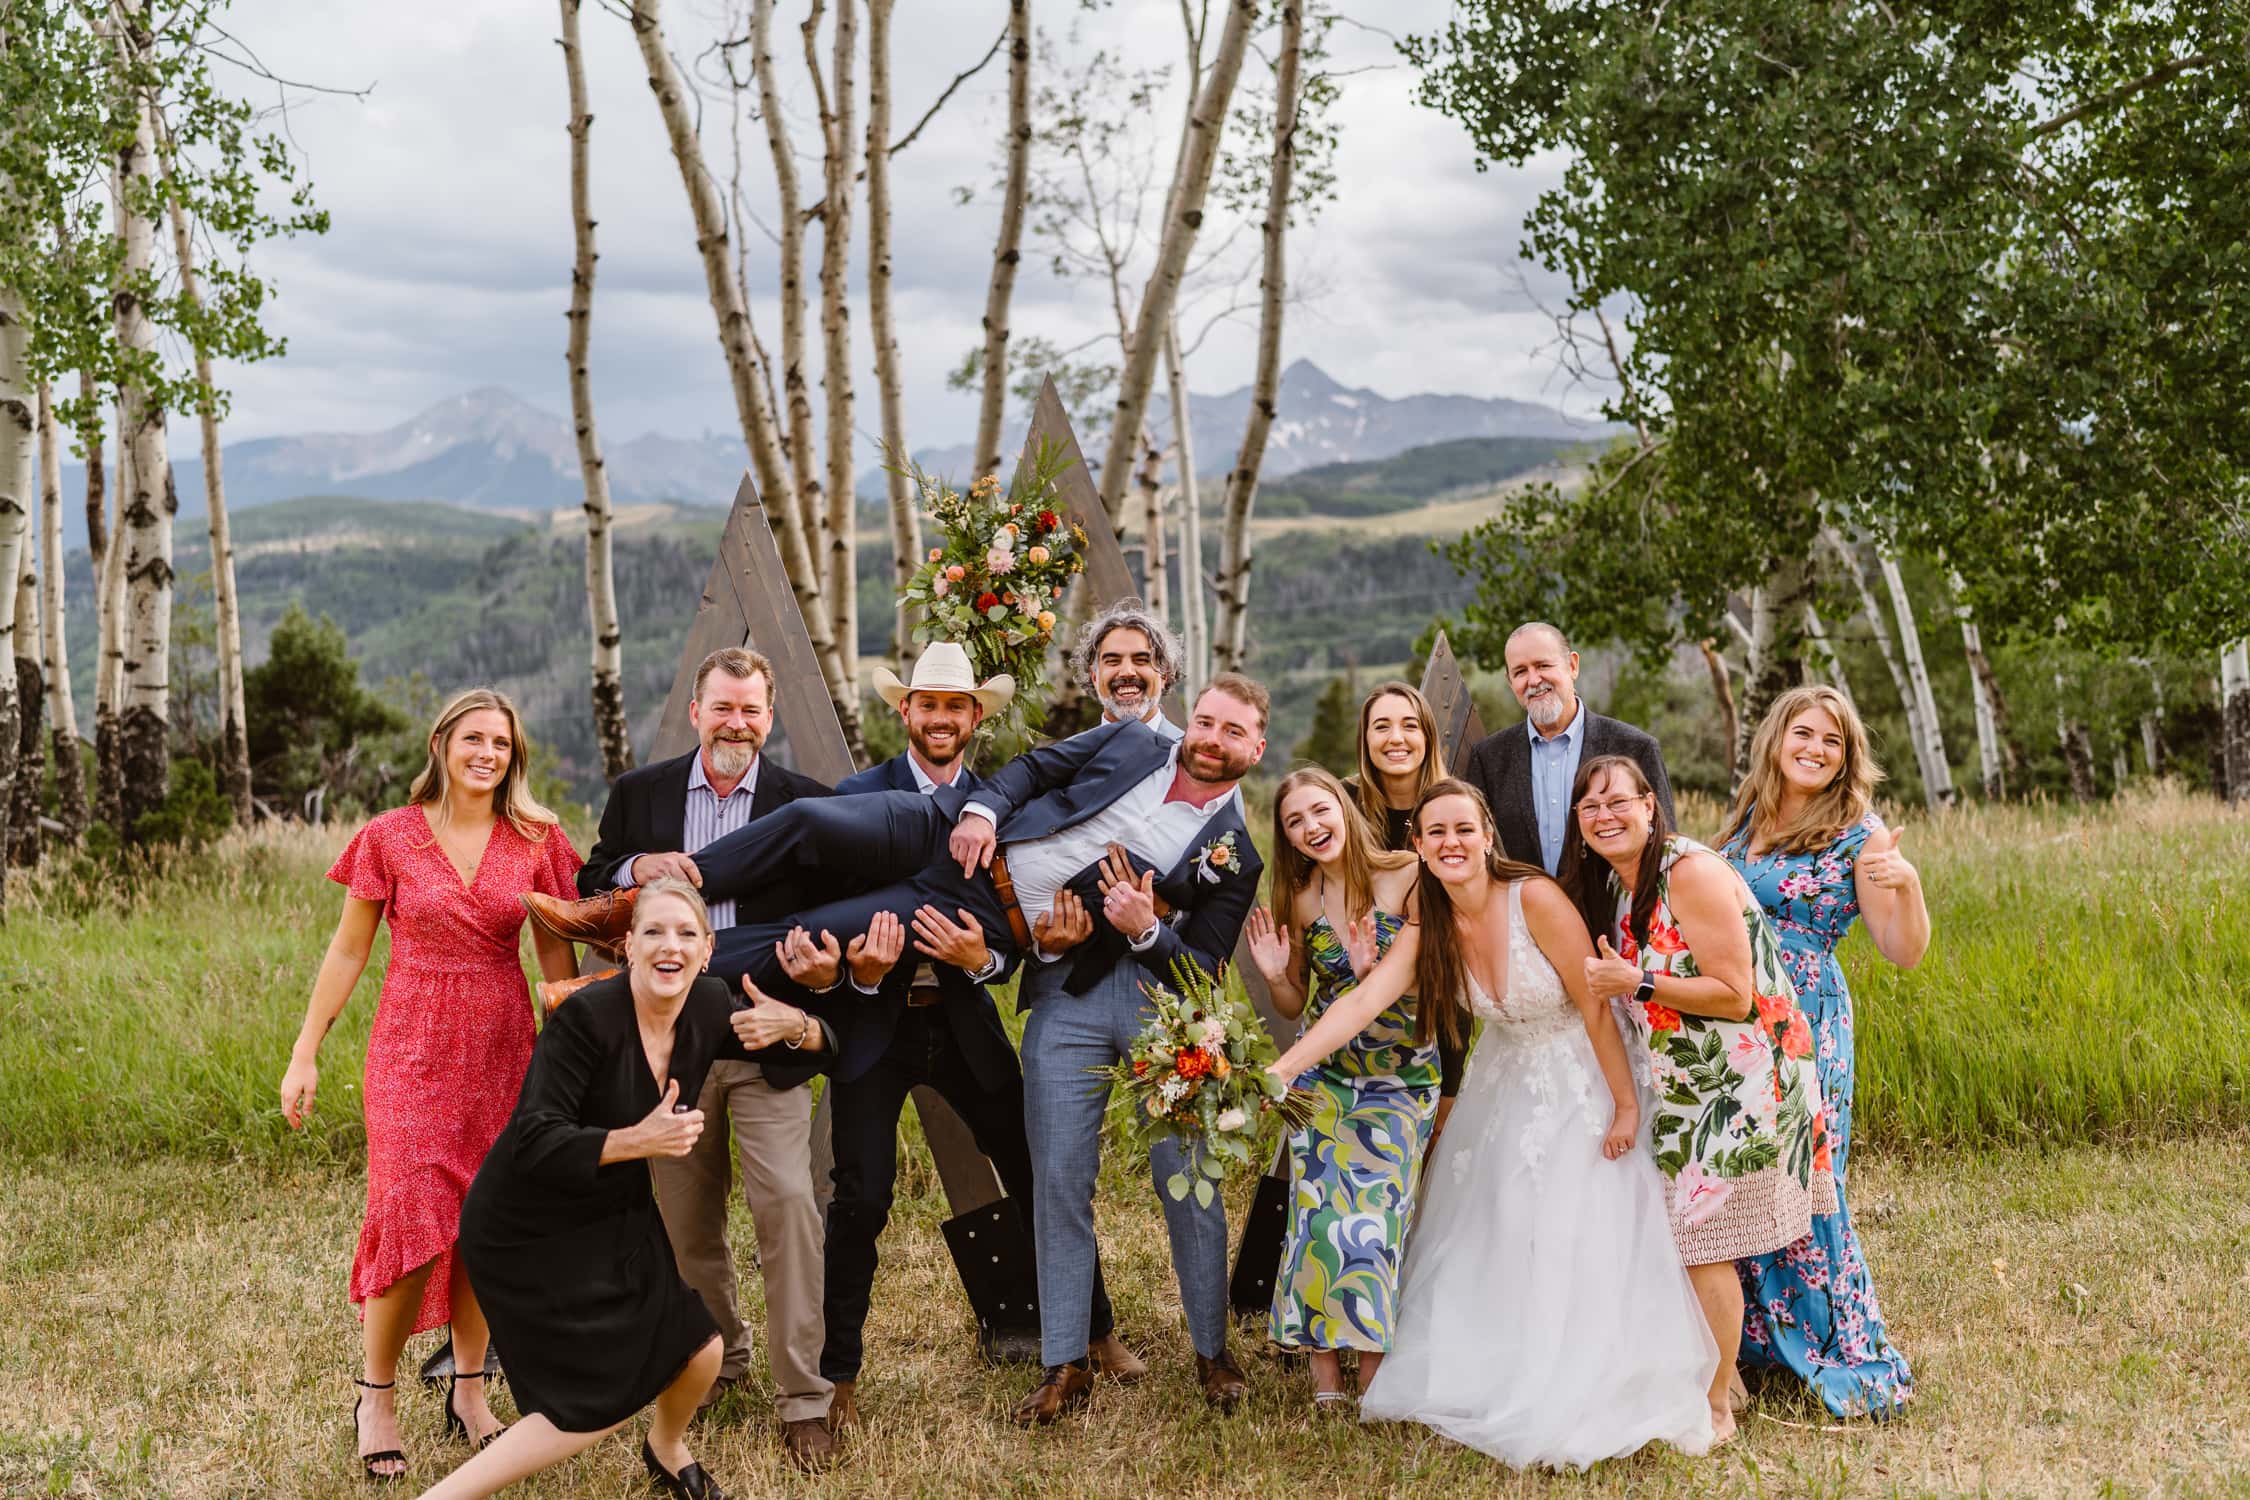 Couple celebrating with family for their Telluride elopement.